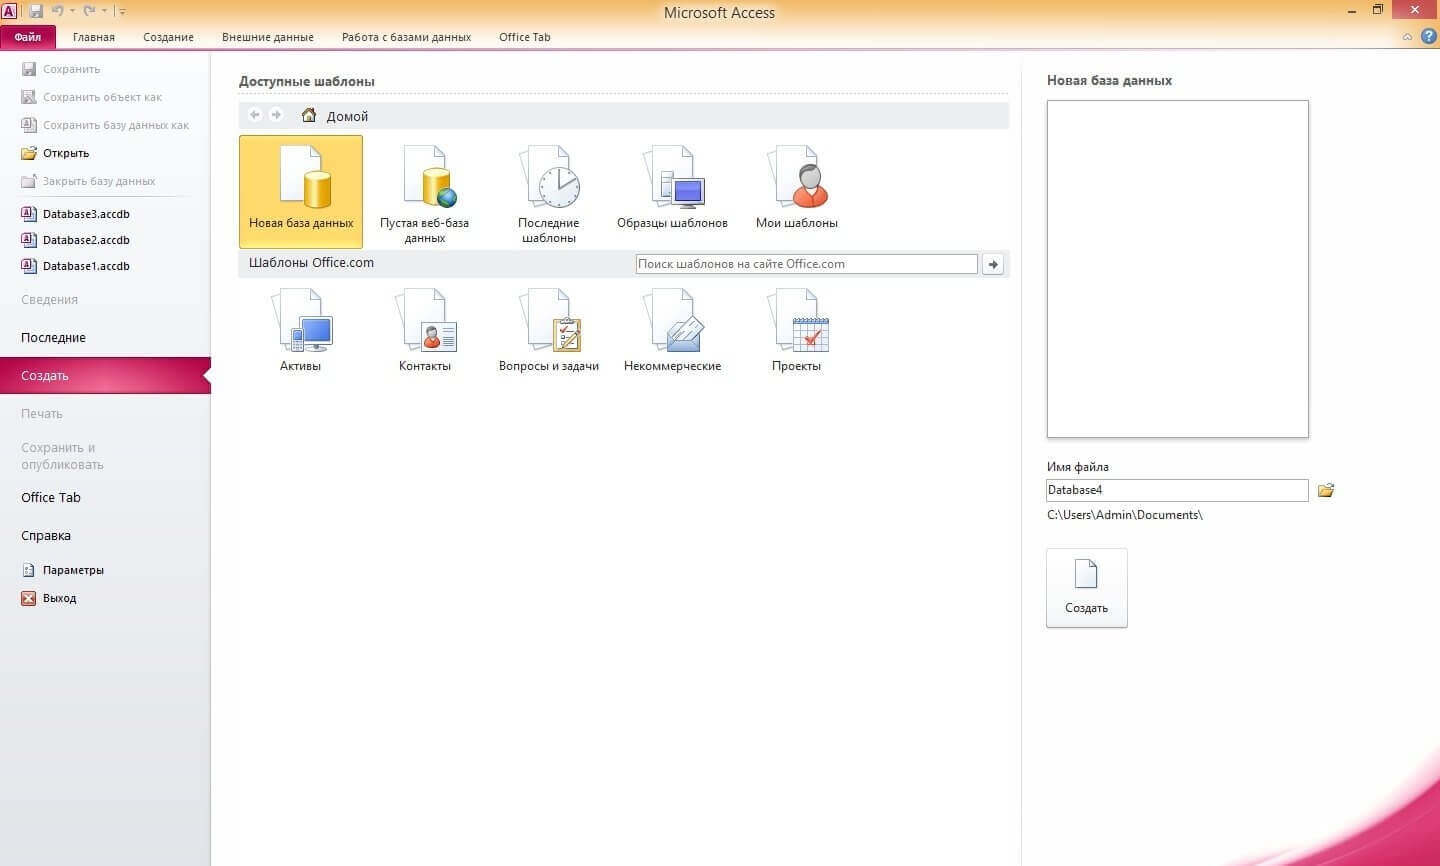 download ms access 2010 free